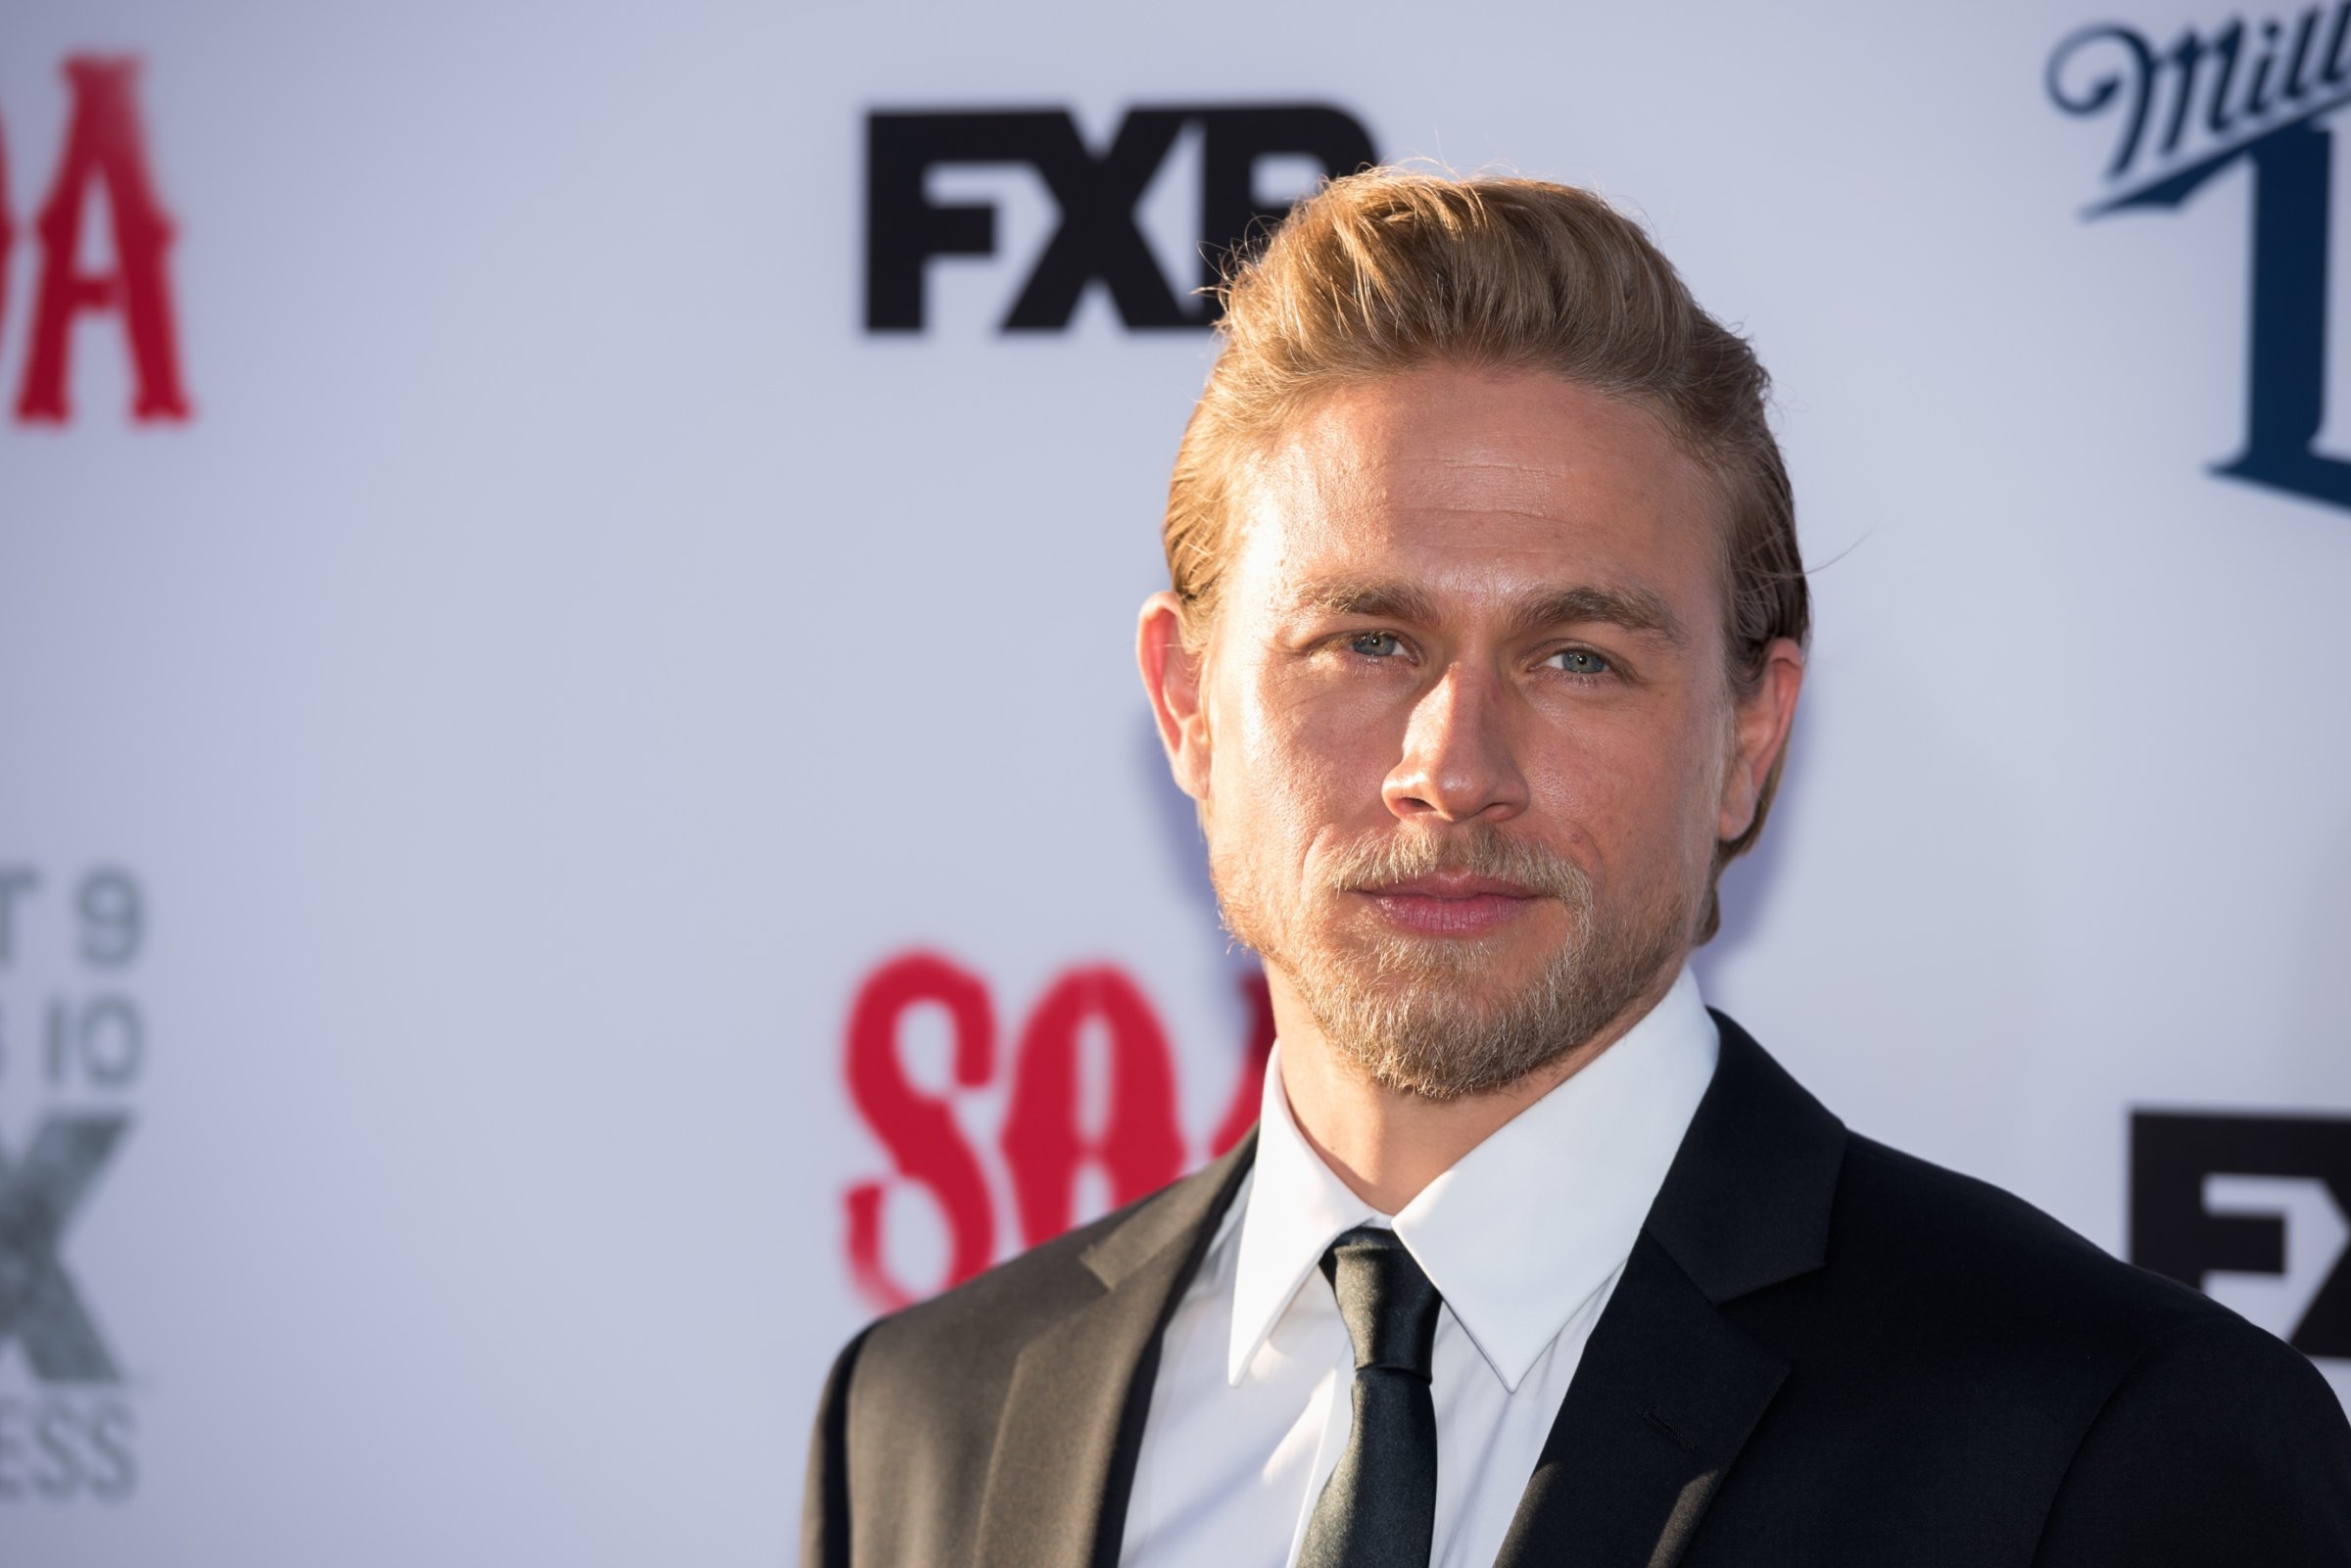 Actor Charlie Hunnam who plays Jackson 'Jax' Teller attends FX's "Sons Of Anarchy" Premiere at TCL Chinese Theatre on September 6, 2014 in Hollywood, California.